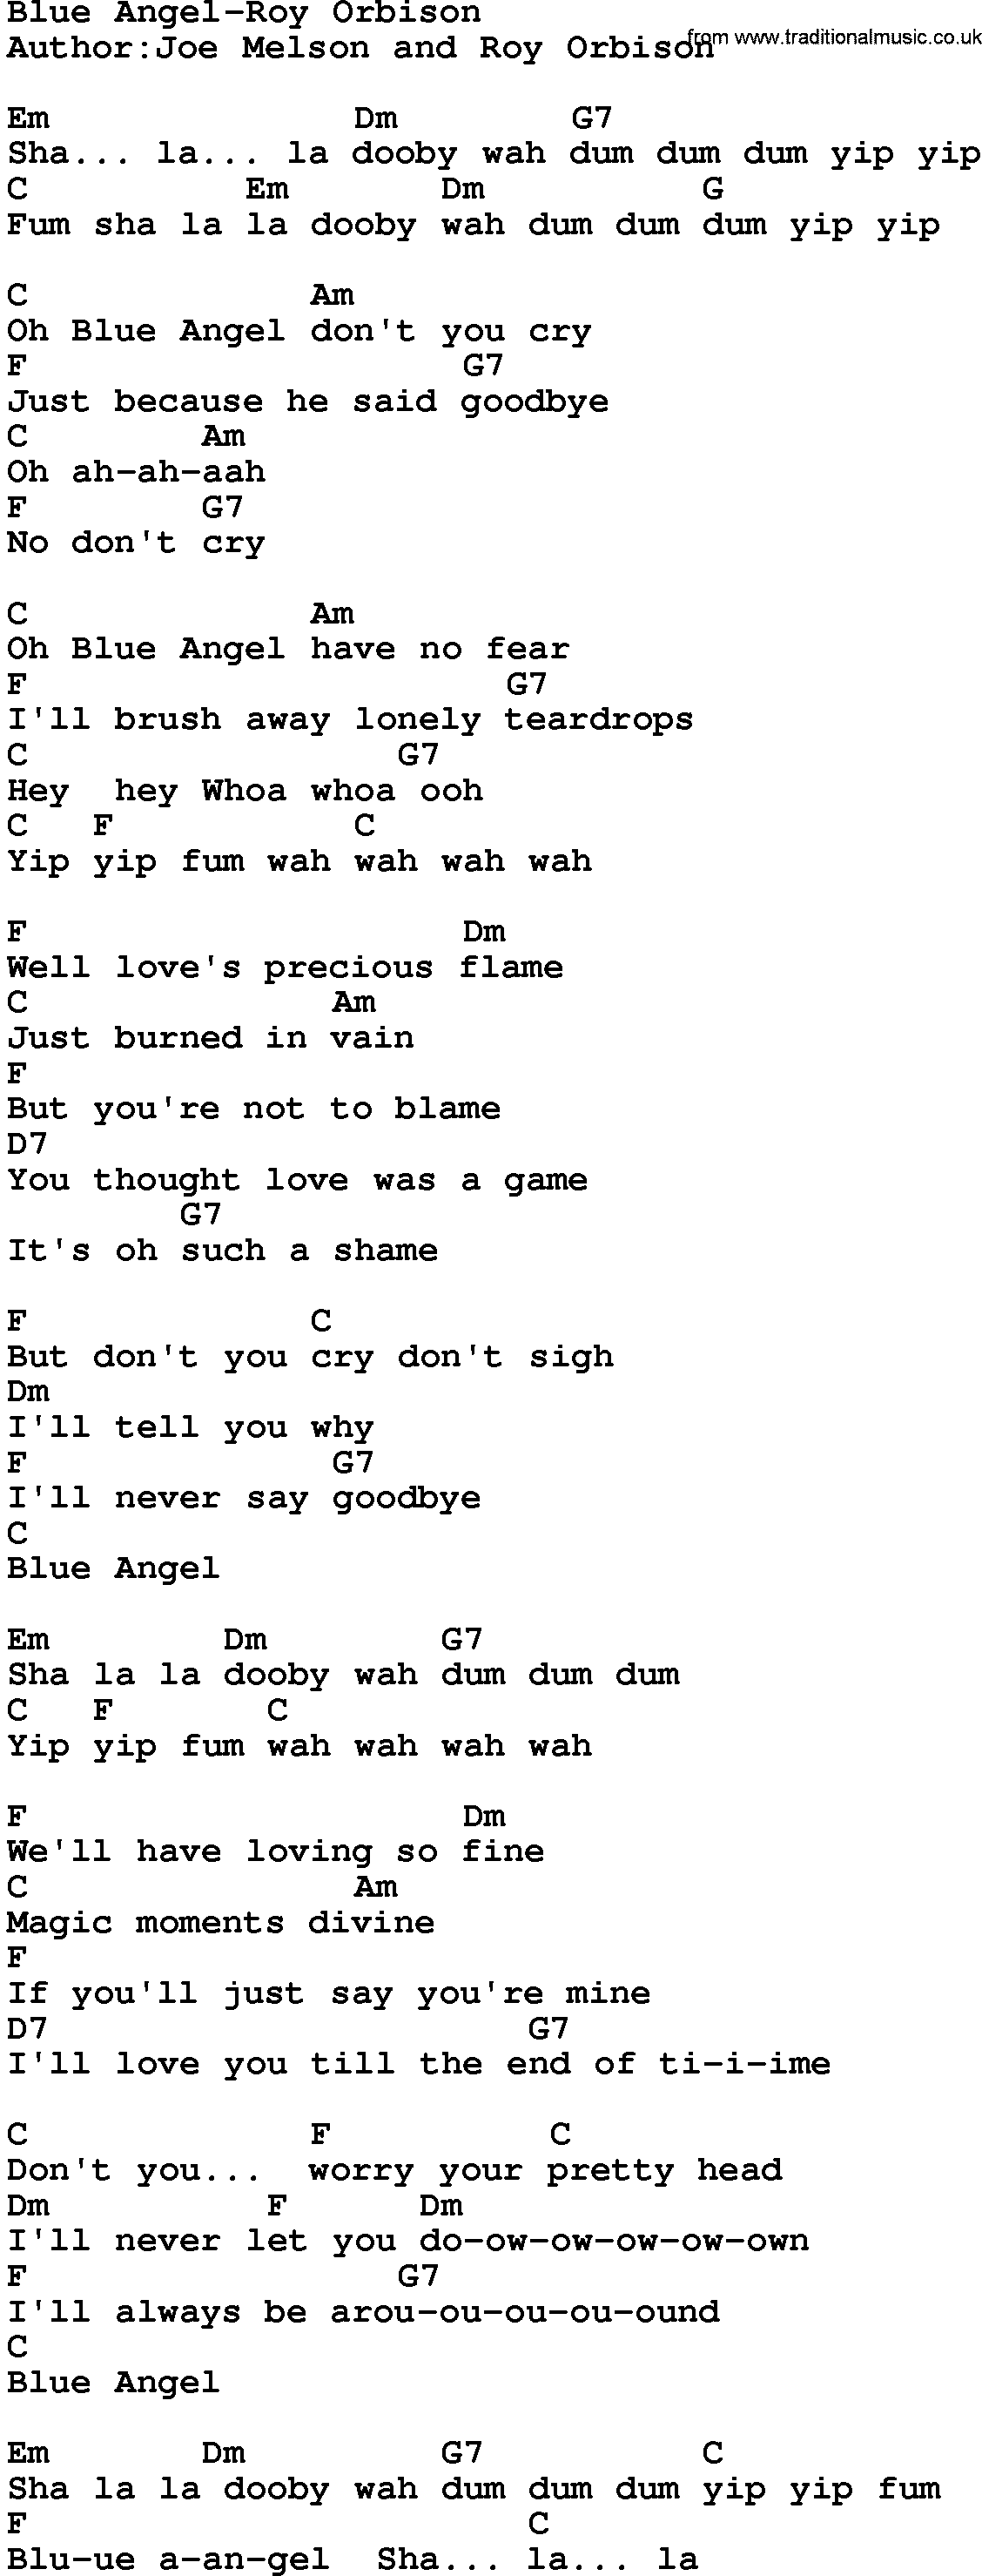 Country music song: Blue Angel-Roy Orbison lyrics and chords